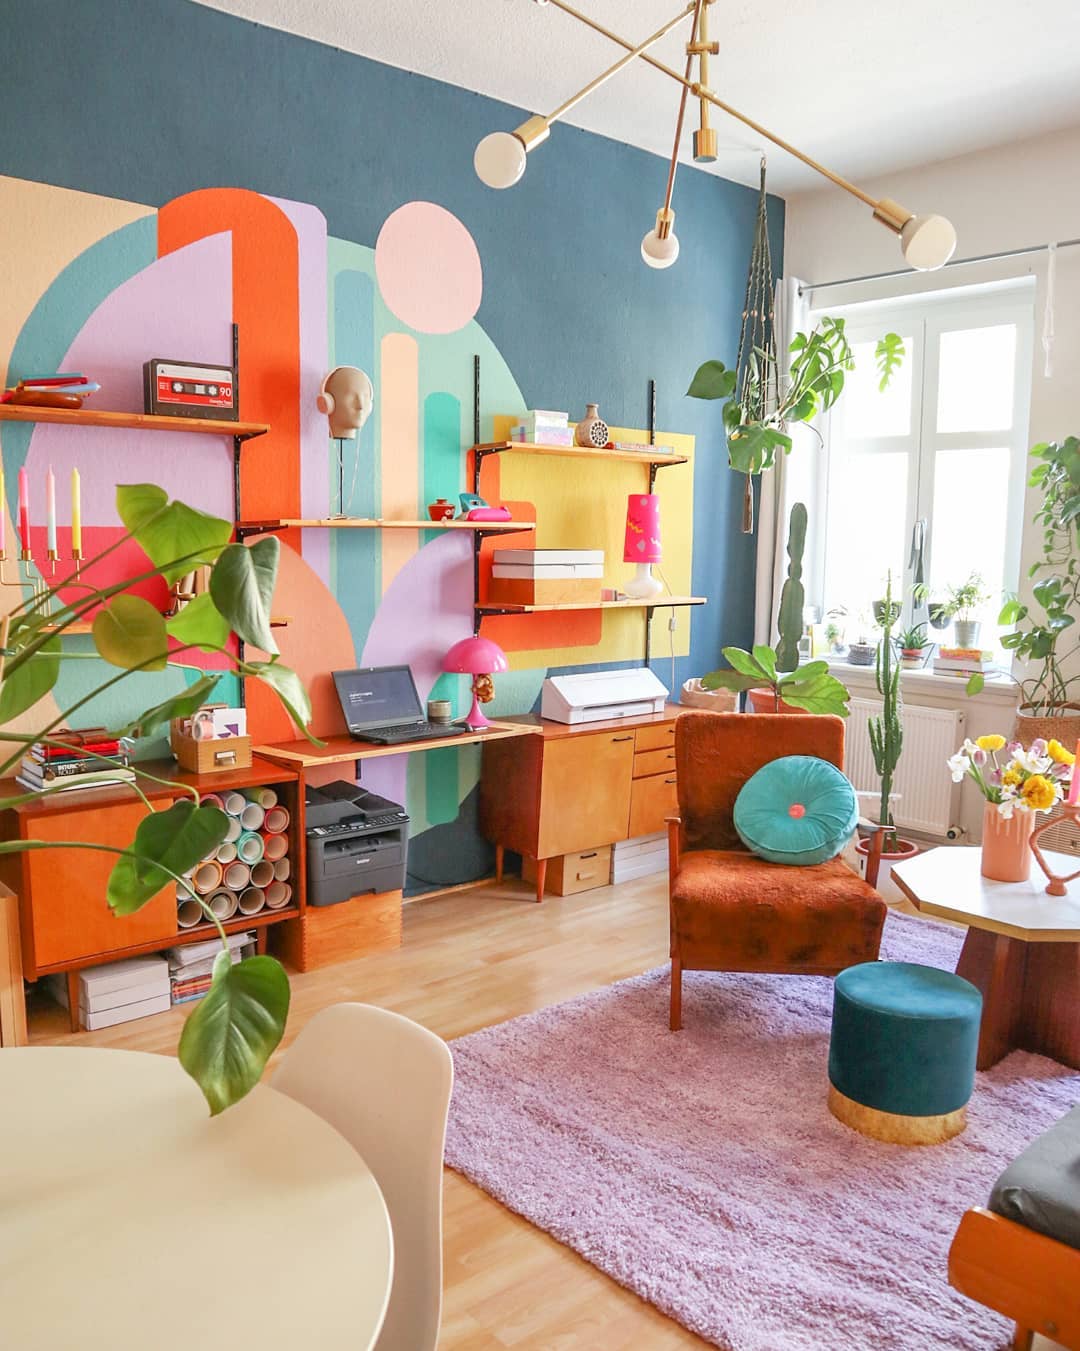 Office Space with Bright Mural on the Wall. Photo by Instagram user @___duundich__